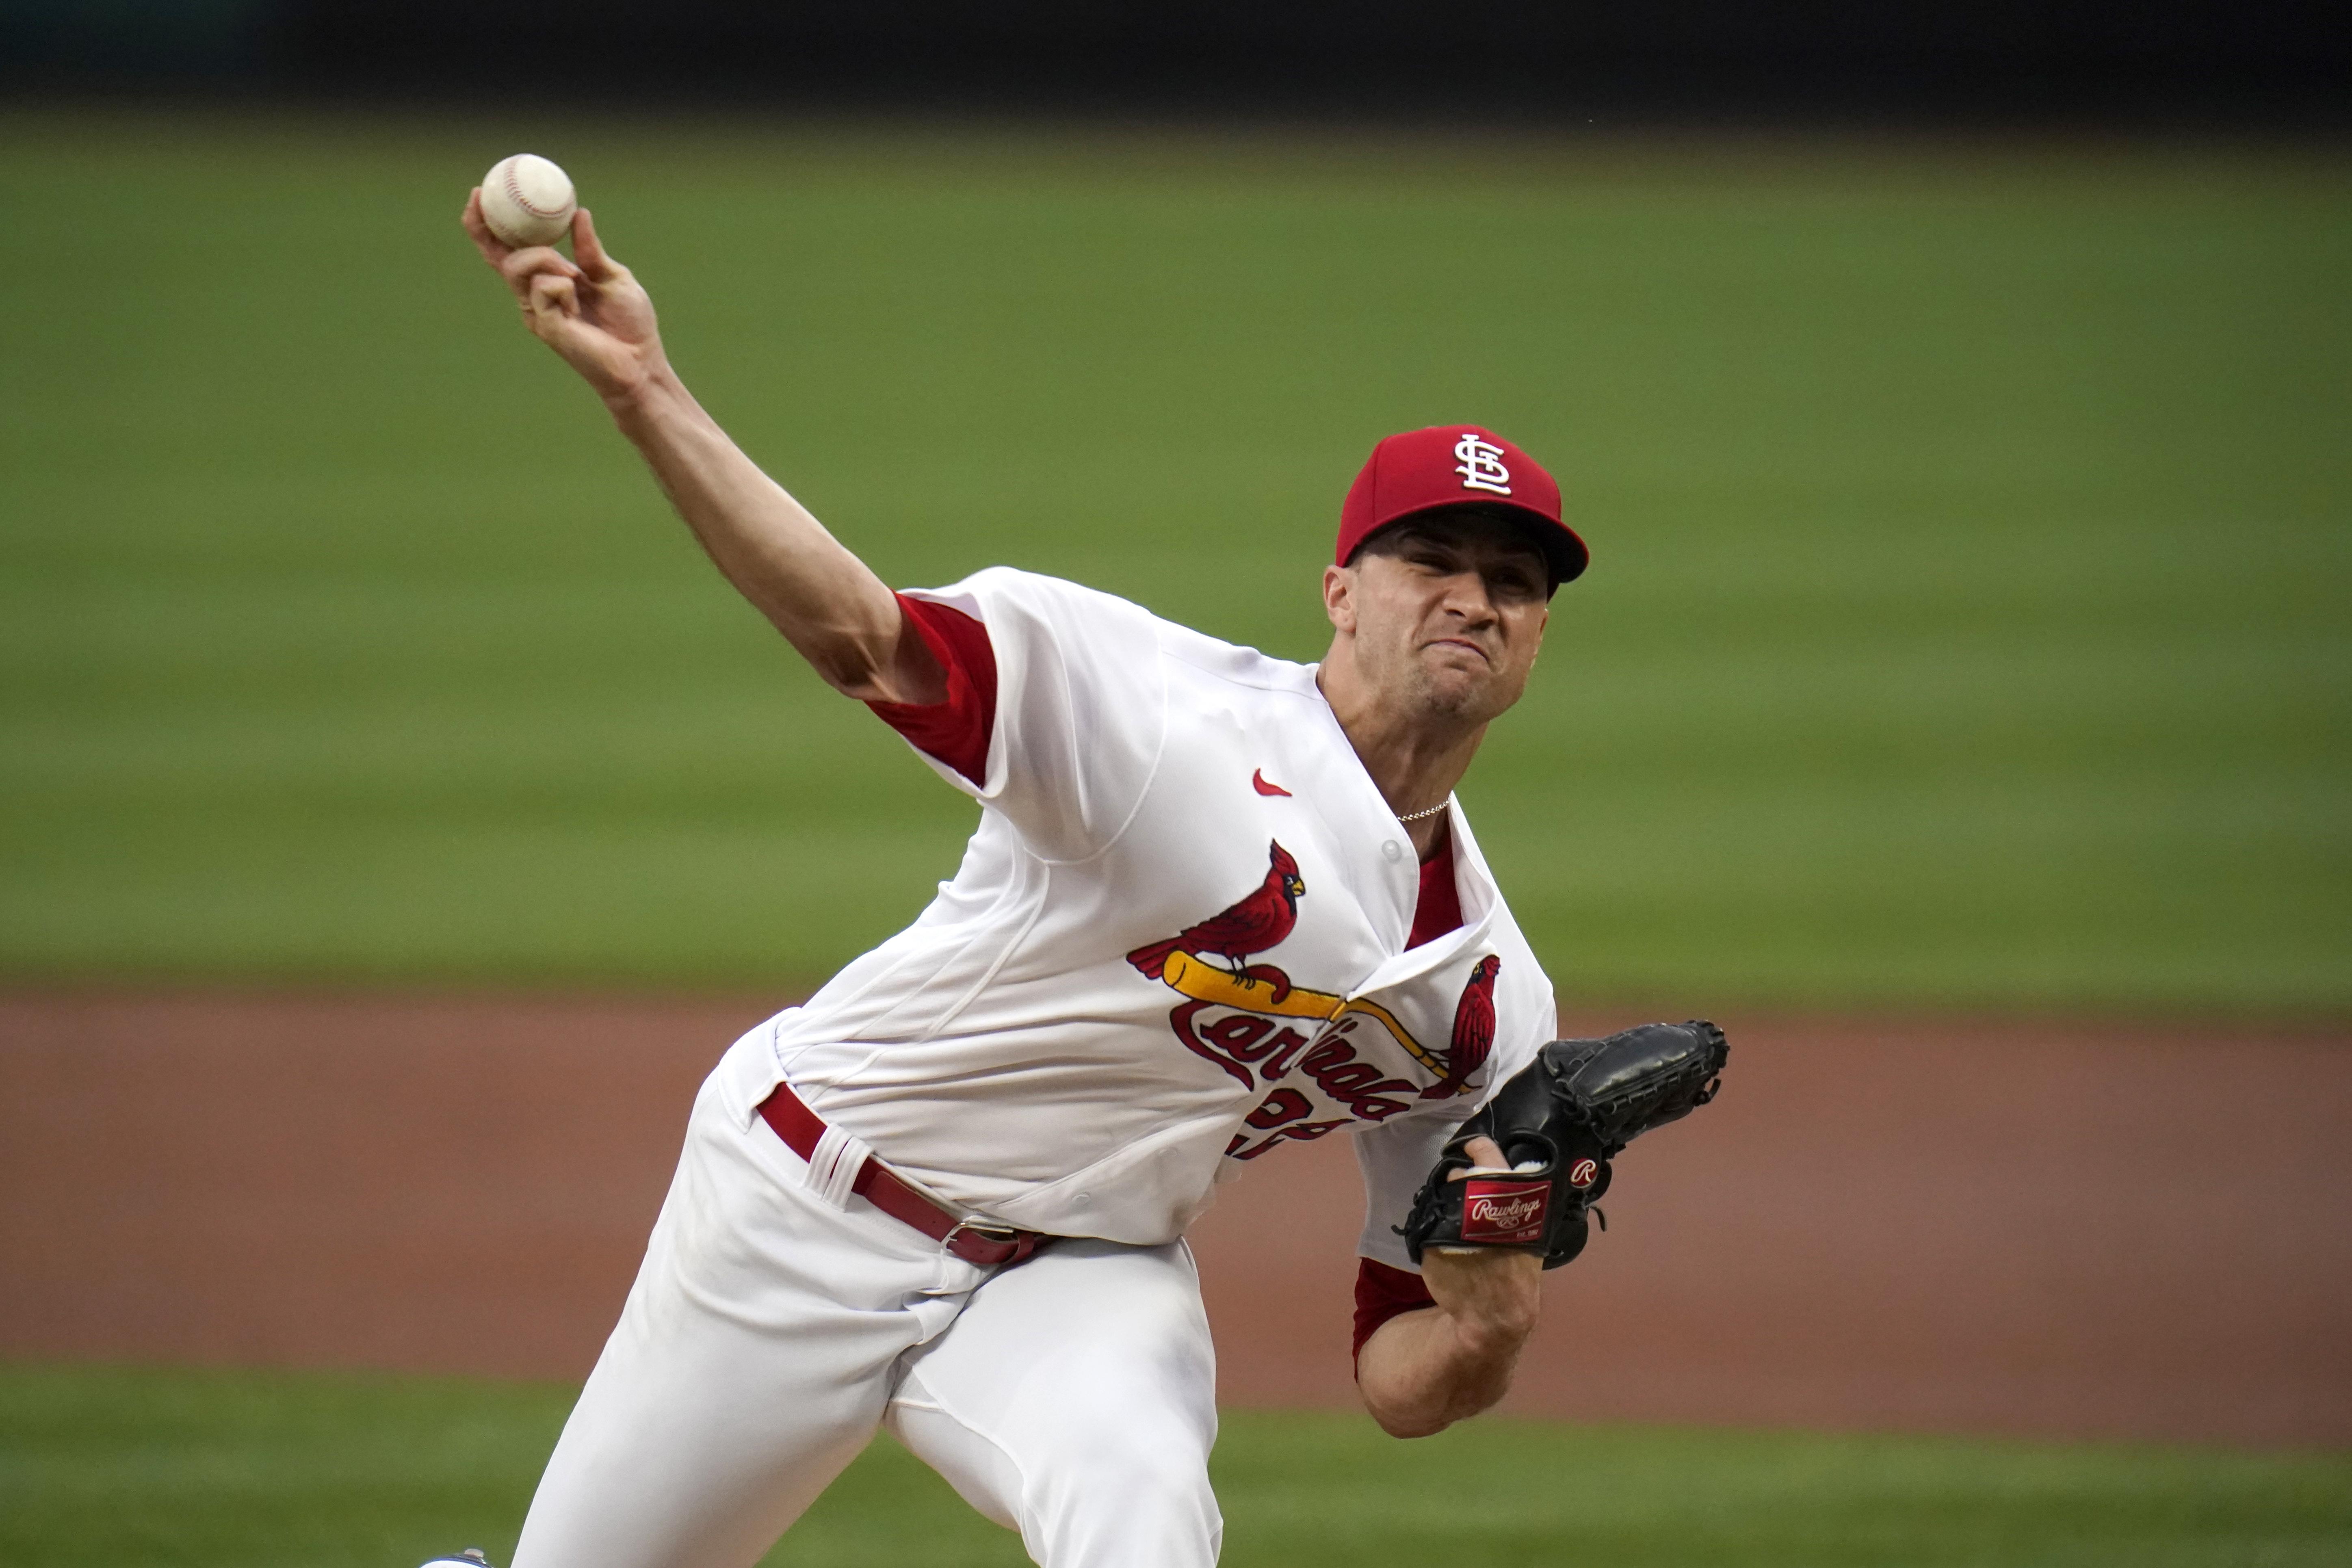 Absolute joke': Cards pitcher on Rays uniform opt-out